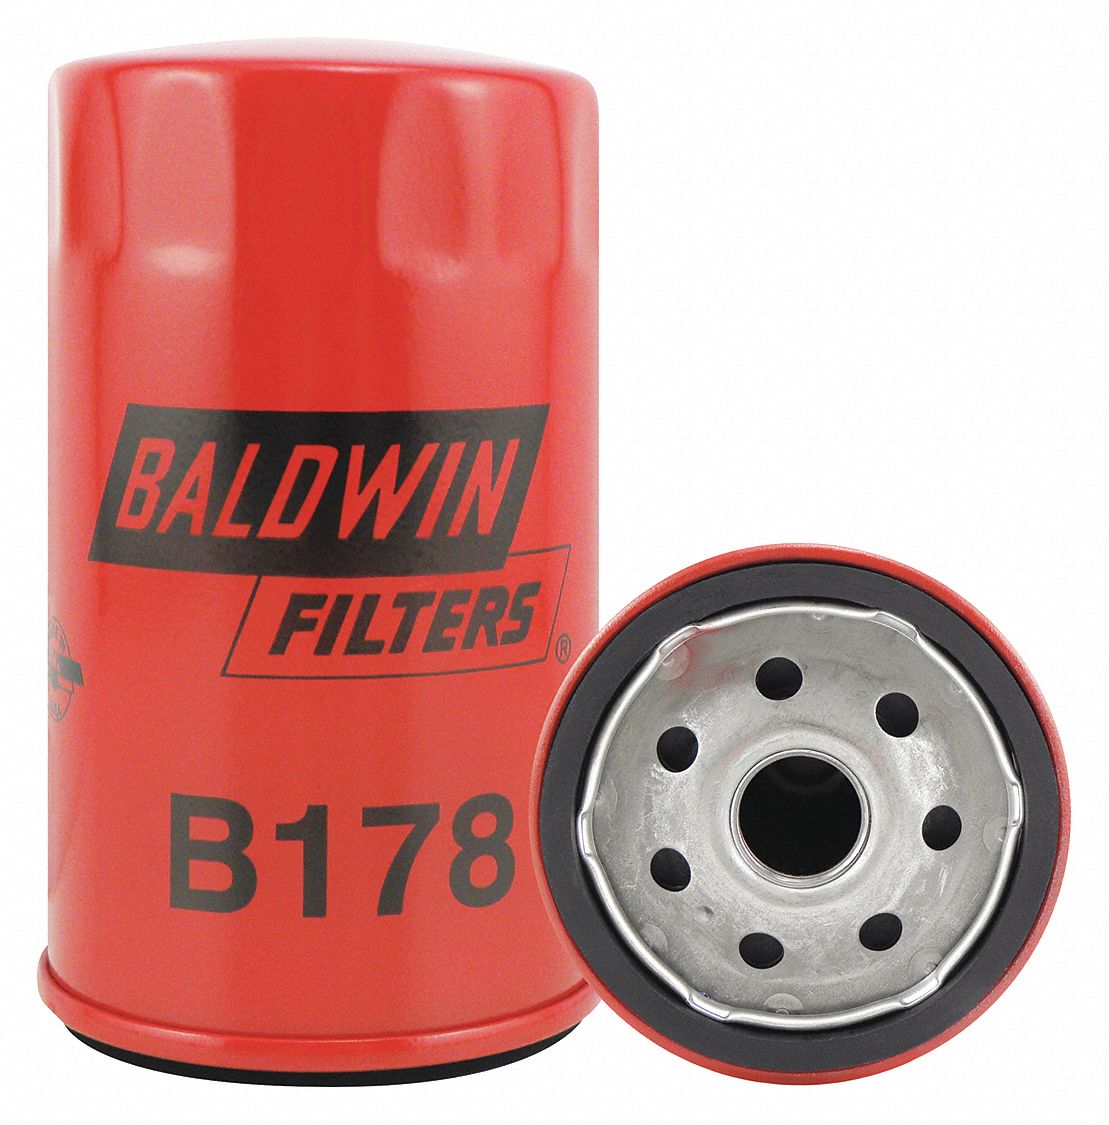 BALDWIN FILTERS  Spin On Oil  Filter  Length 5 1 8 